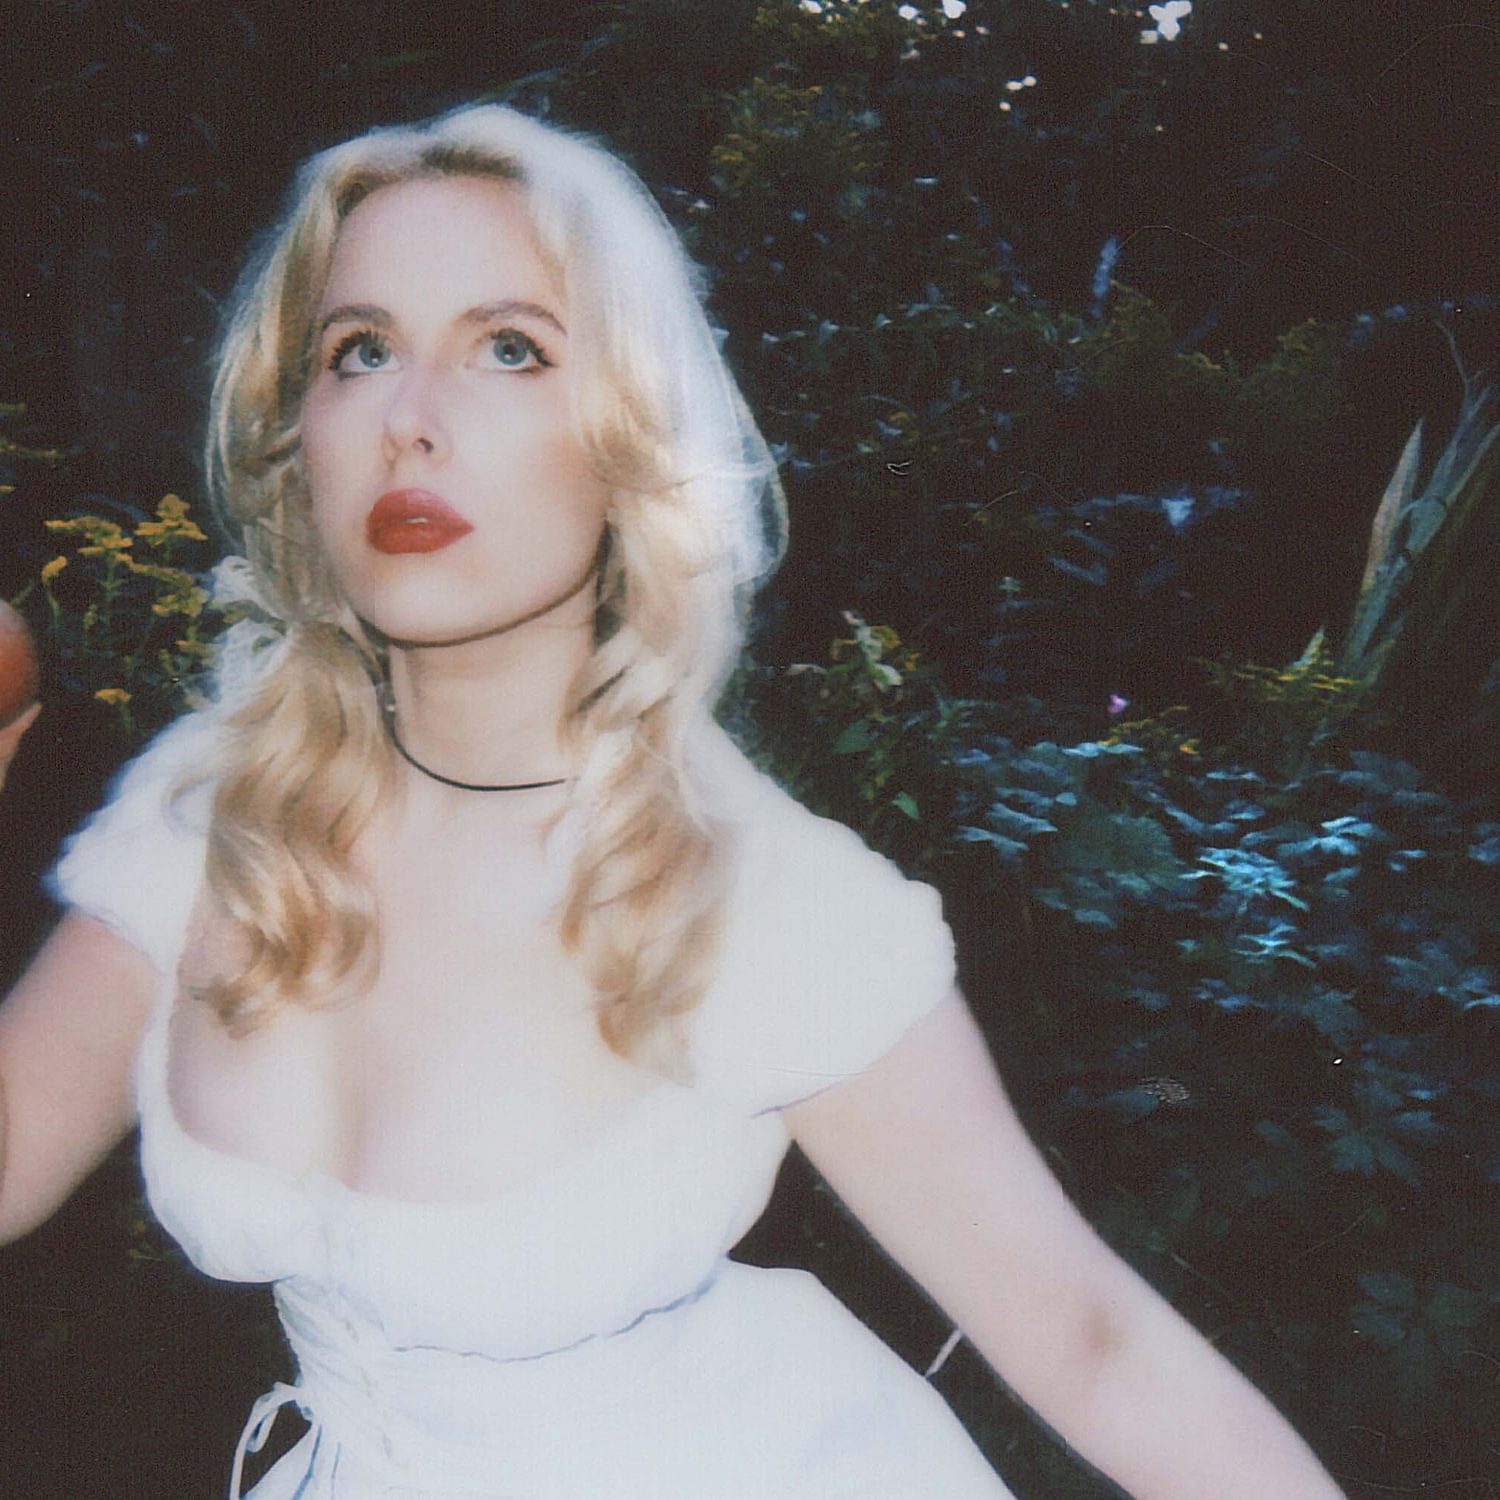 Holly Macve on working with Lana Del Rey and her new EP 'Time Is Forever'